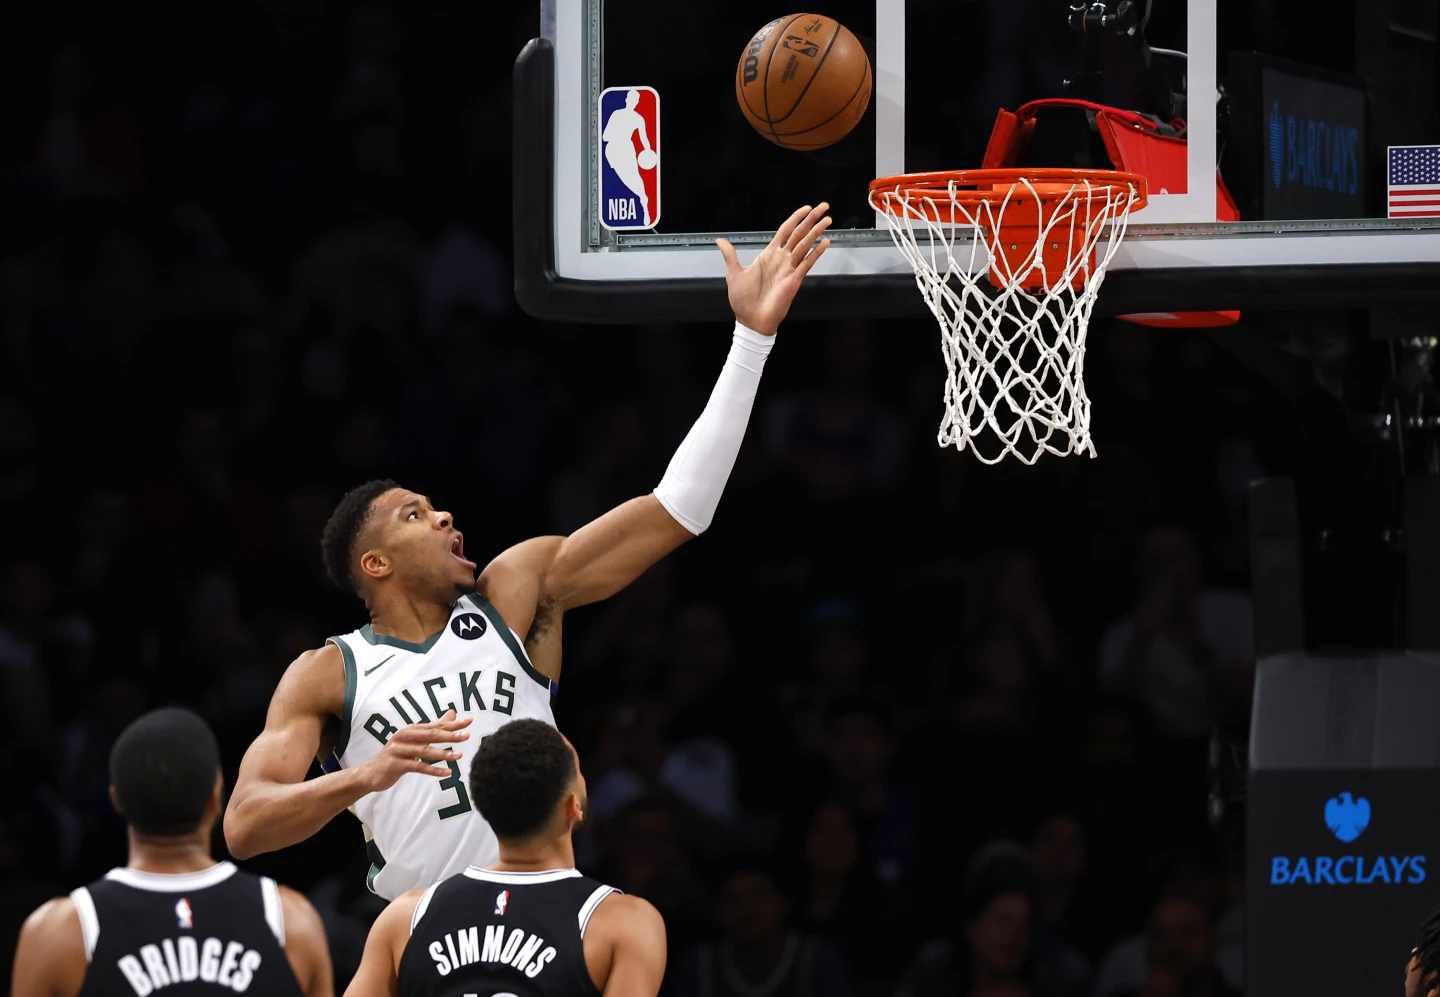 Giannis Antetokounmpo has 36 points and 12 rebounds, Bucks beat Nets 129-125